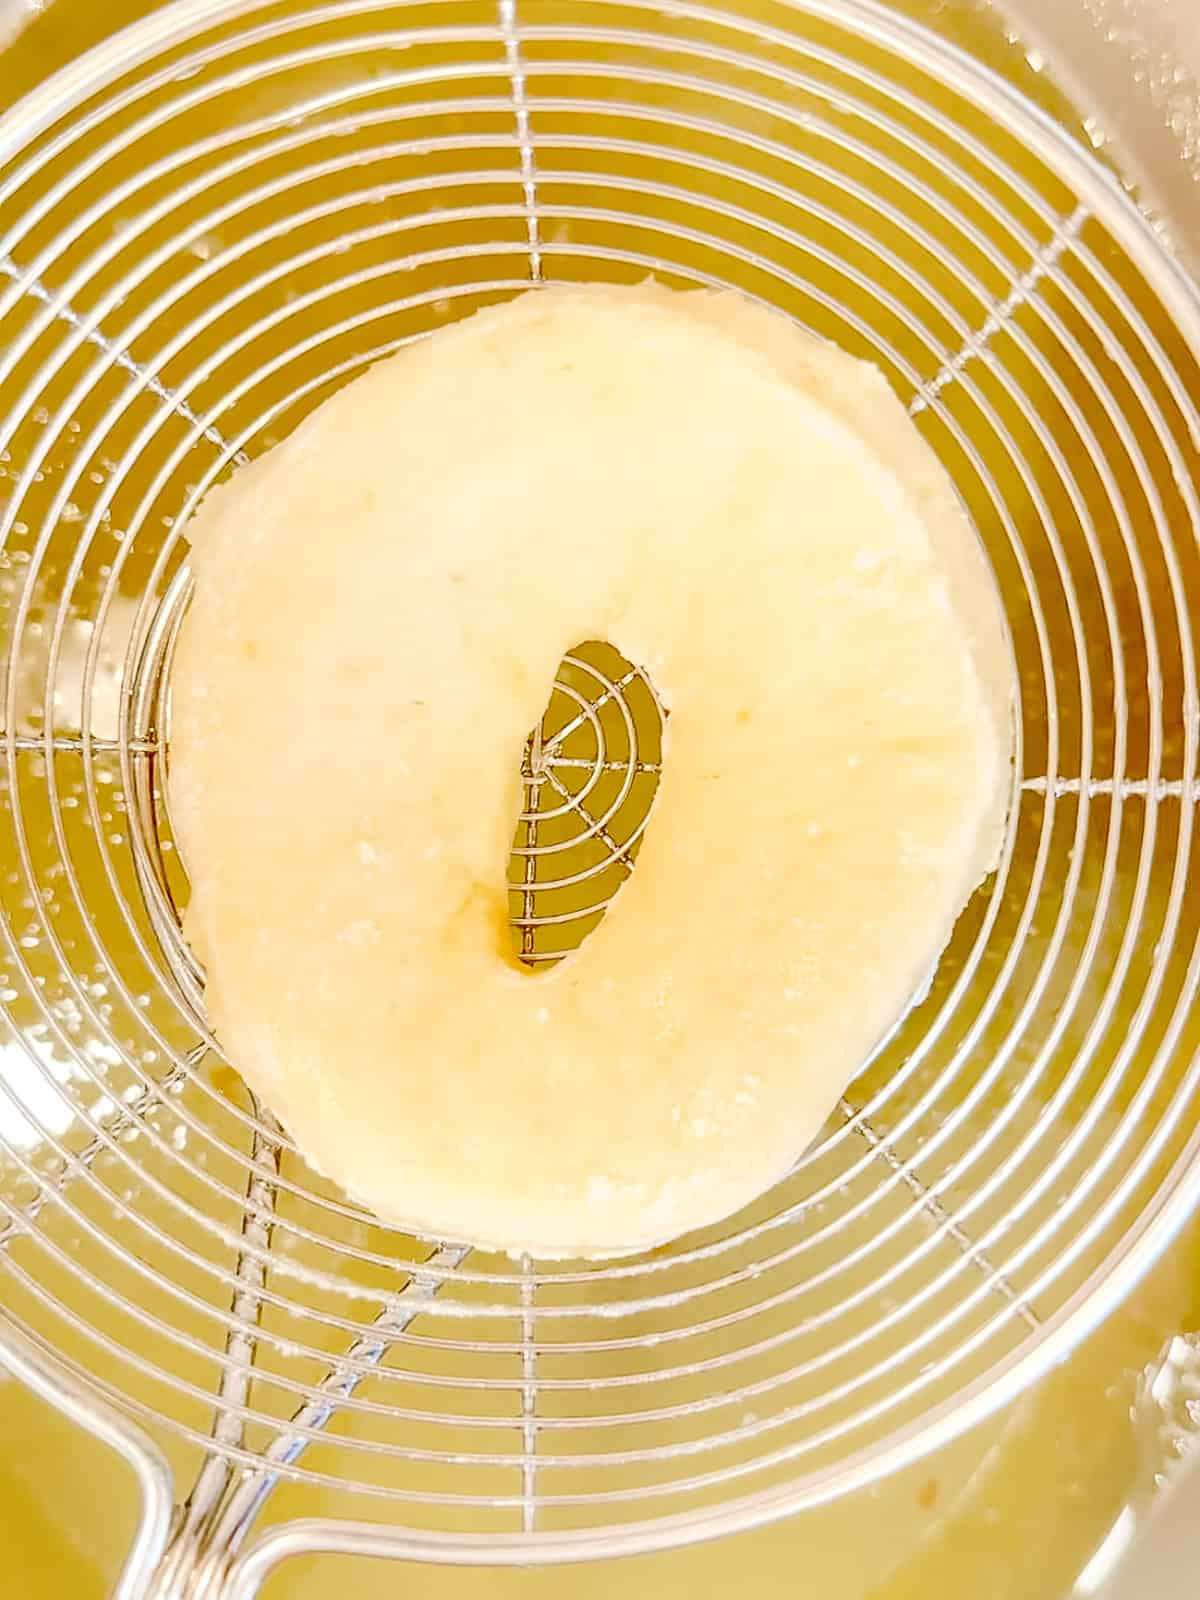 Lowering a donut into hot oil.